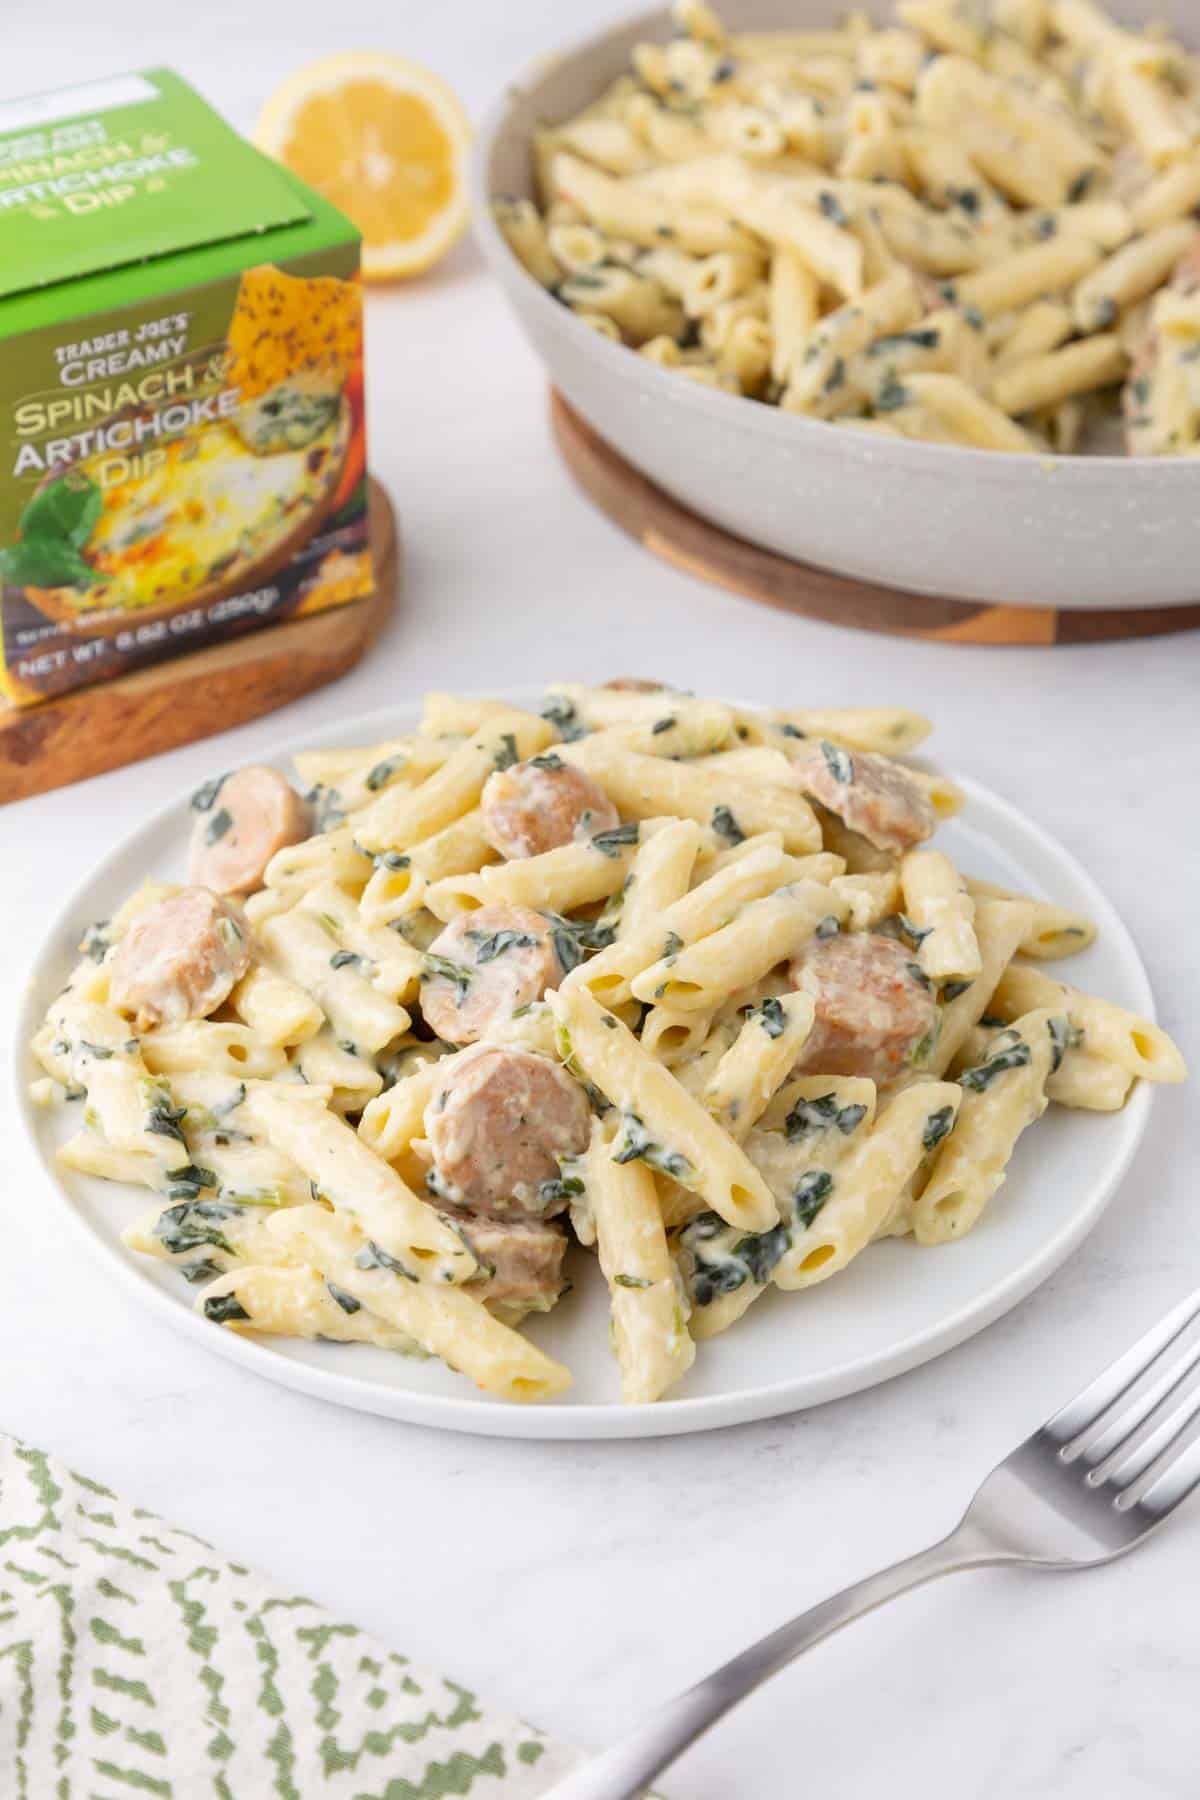 A plate of Trader Joe's Spinach and Artichoke pasta with sausage on a white plate.